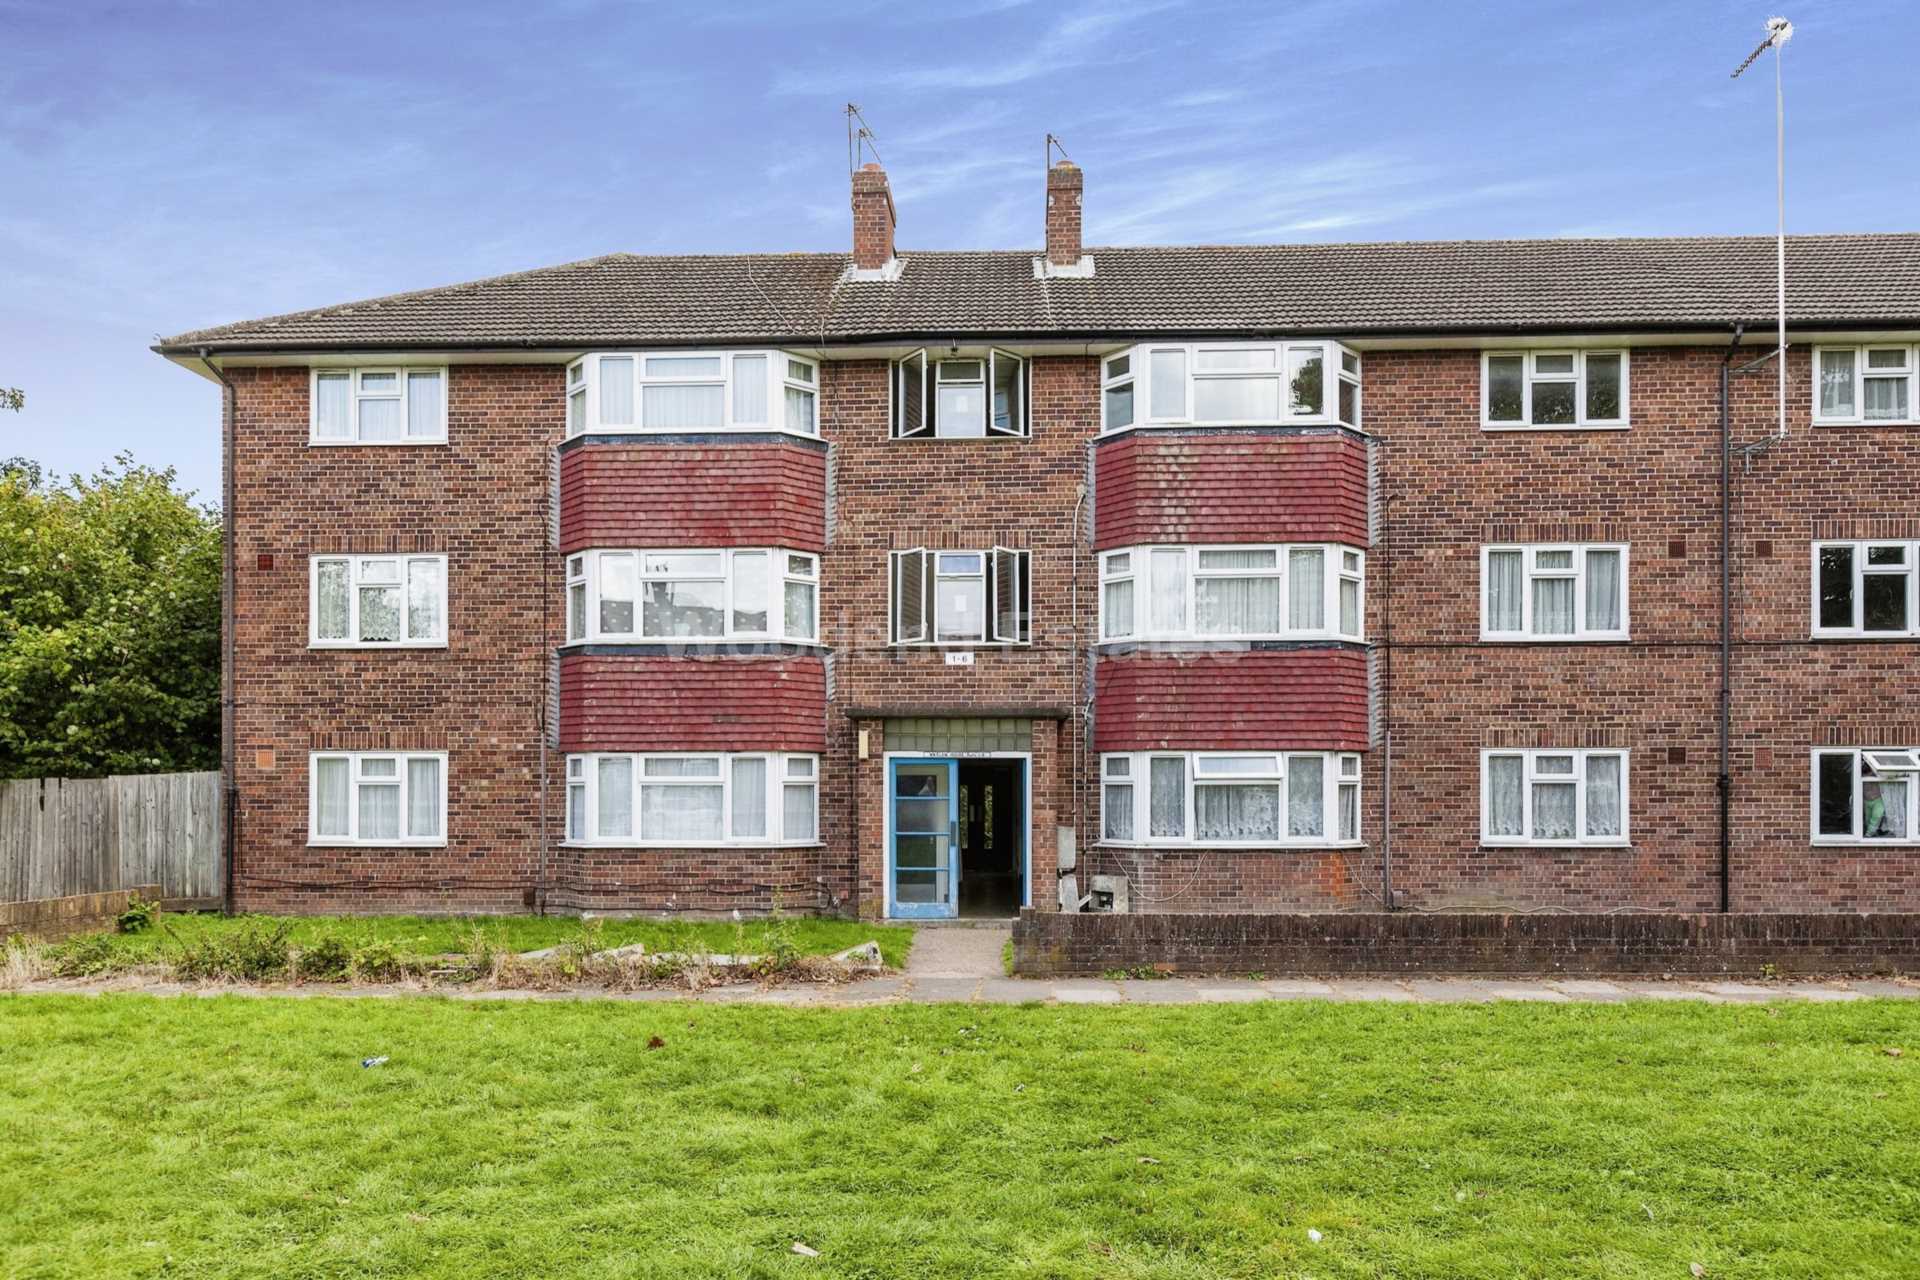 Waxlow House, Hornbeam Road, Hayes, Middlesex, Image 3